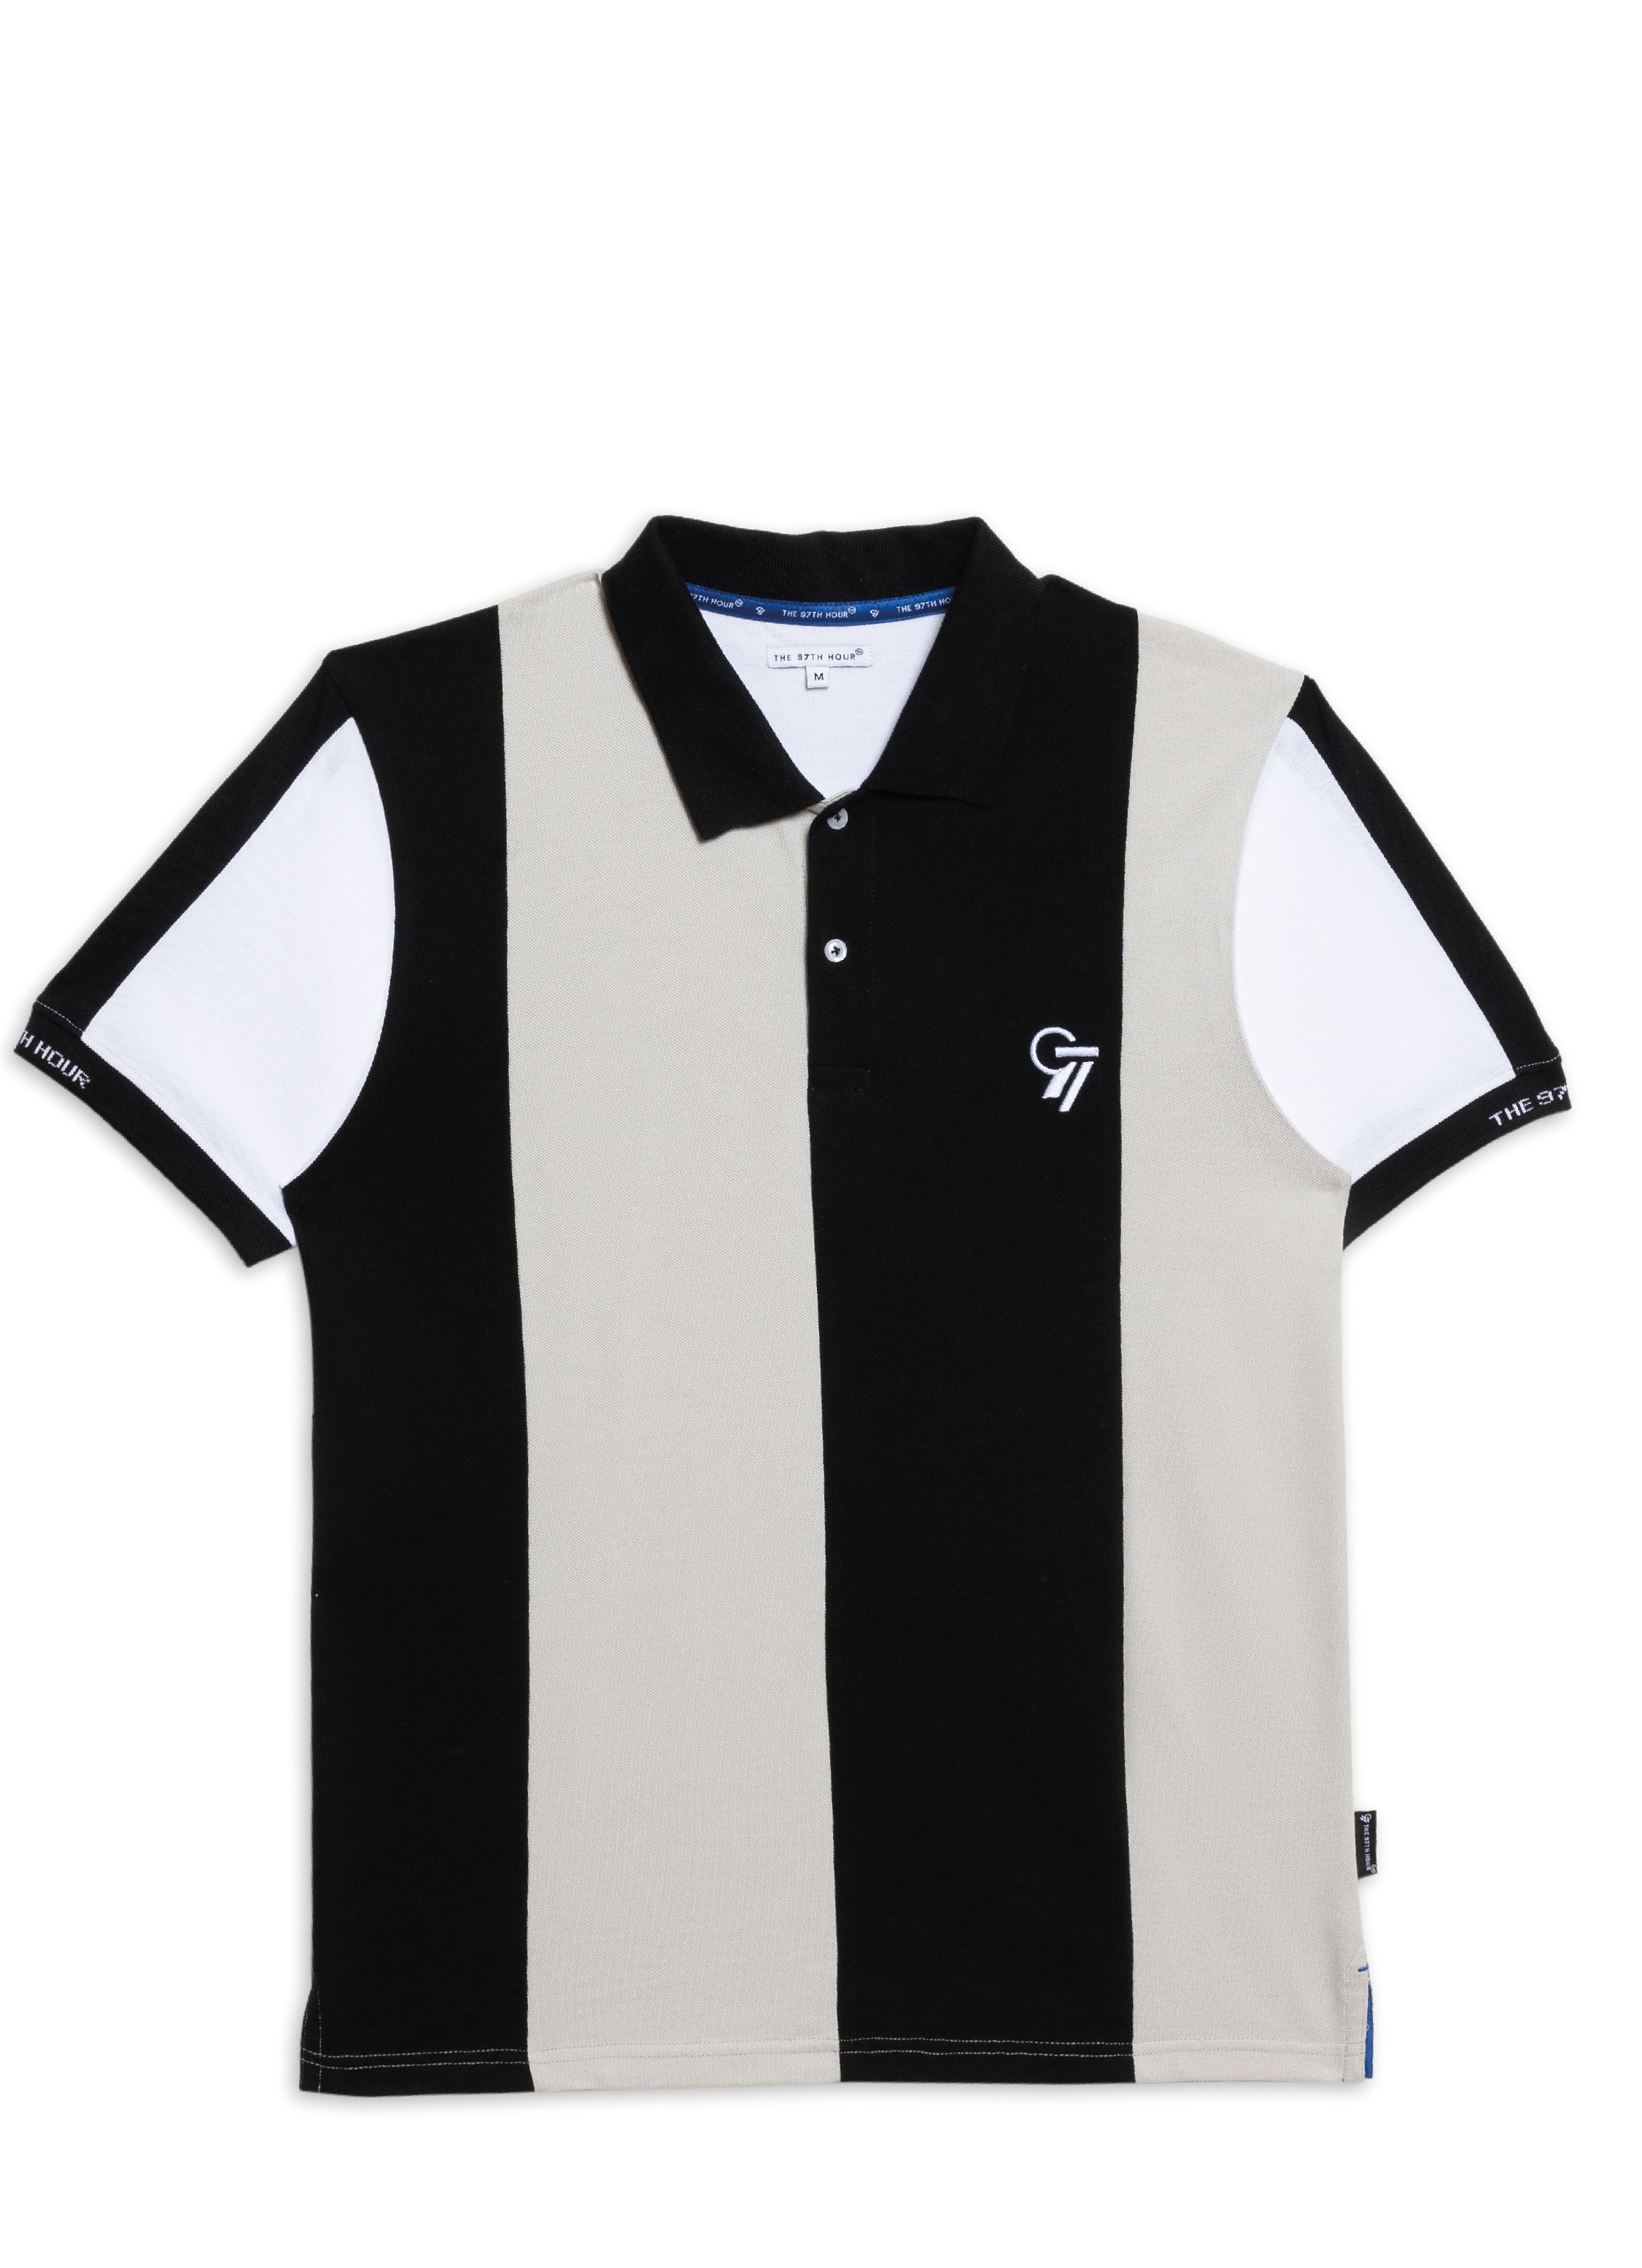 Buy The 97th Hour Shadowplay Tri-blend Polo Back Look